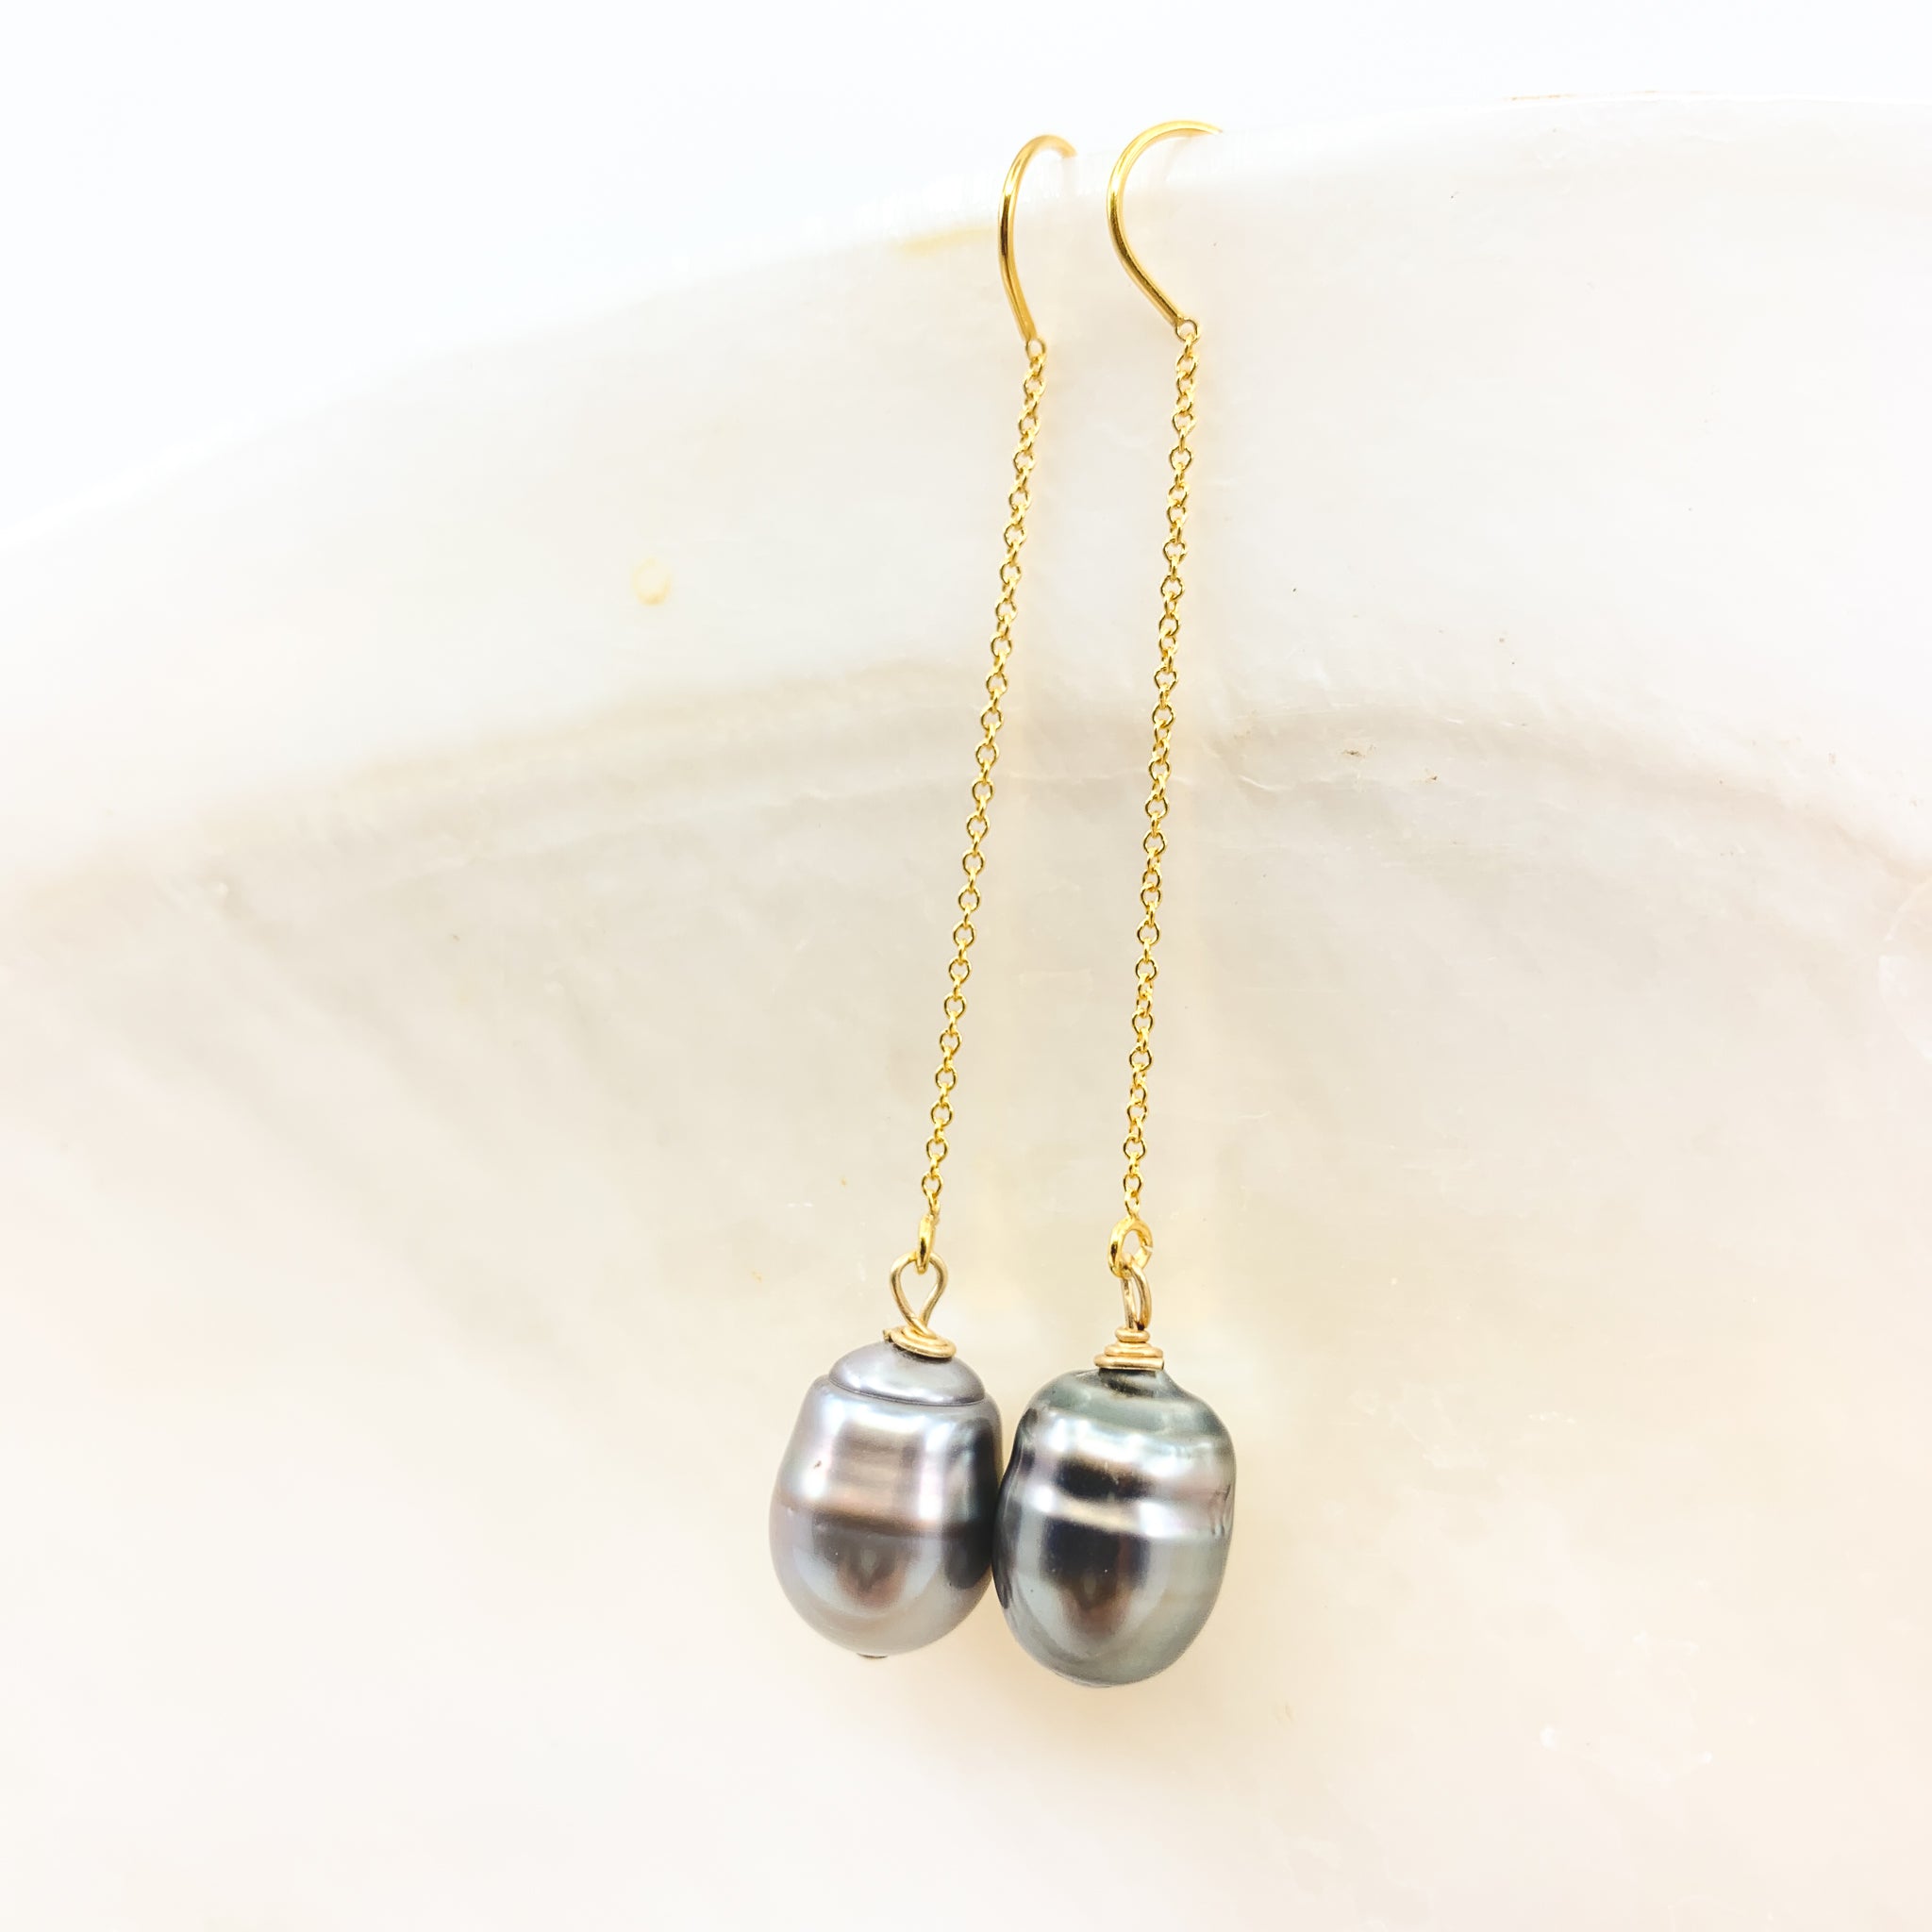 tahitian pearls threader style gold fill earrings by eve black jewelry made in Hawaii